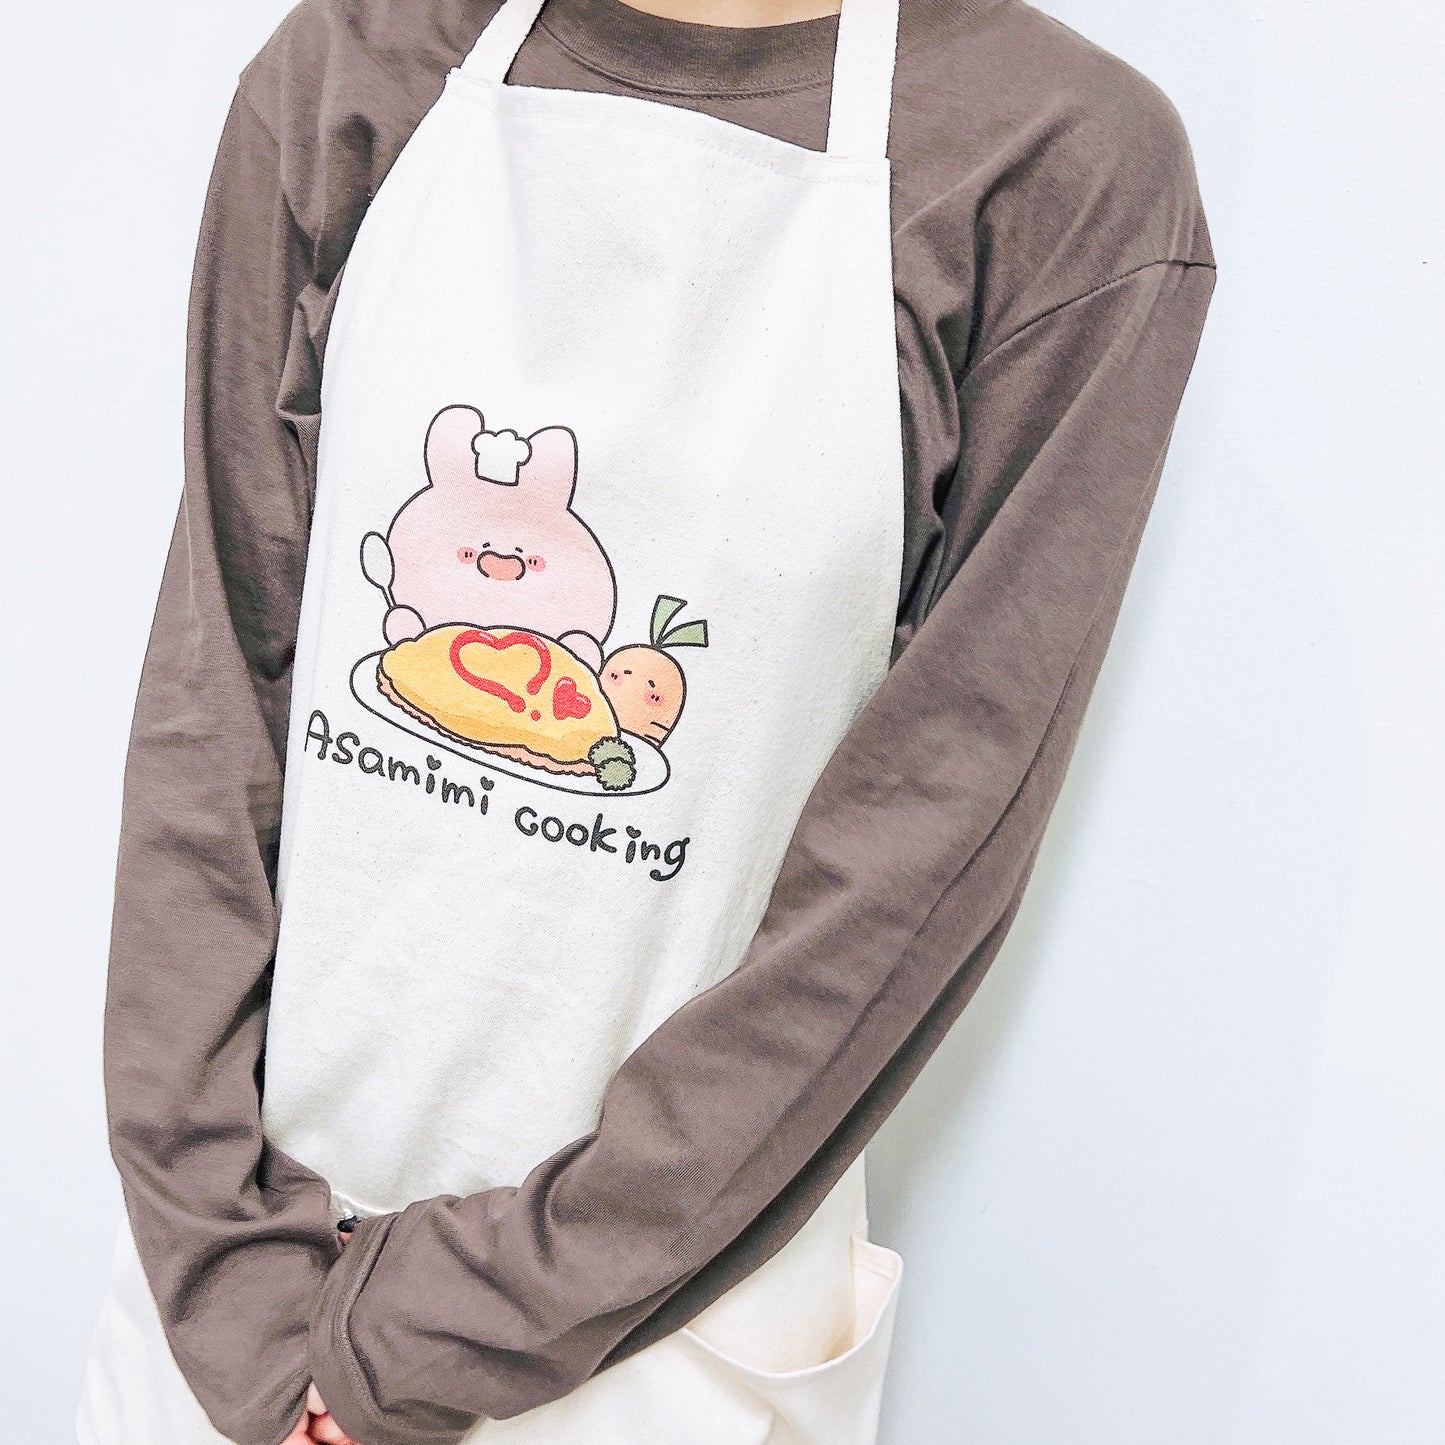 [Asamimi-chan] Apron (Asamimi Cooking) [Shipped in mid-August]